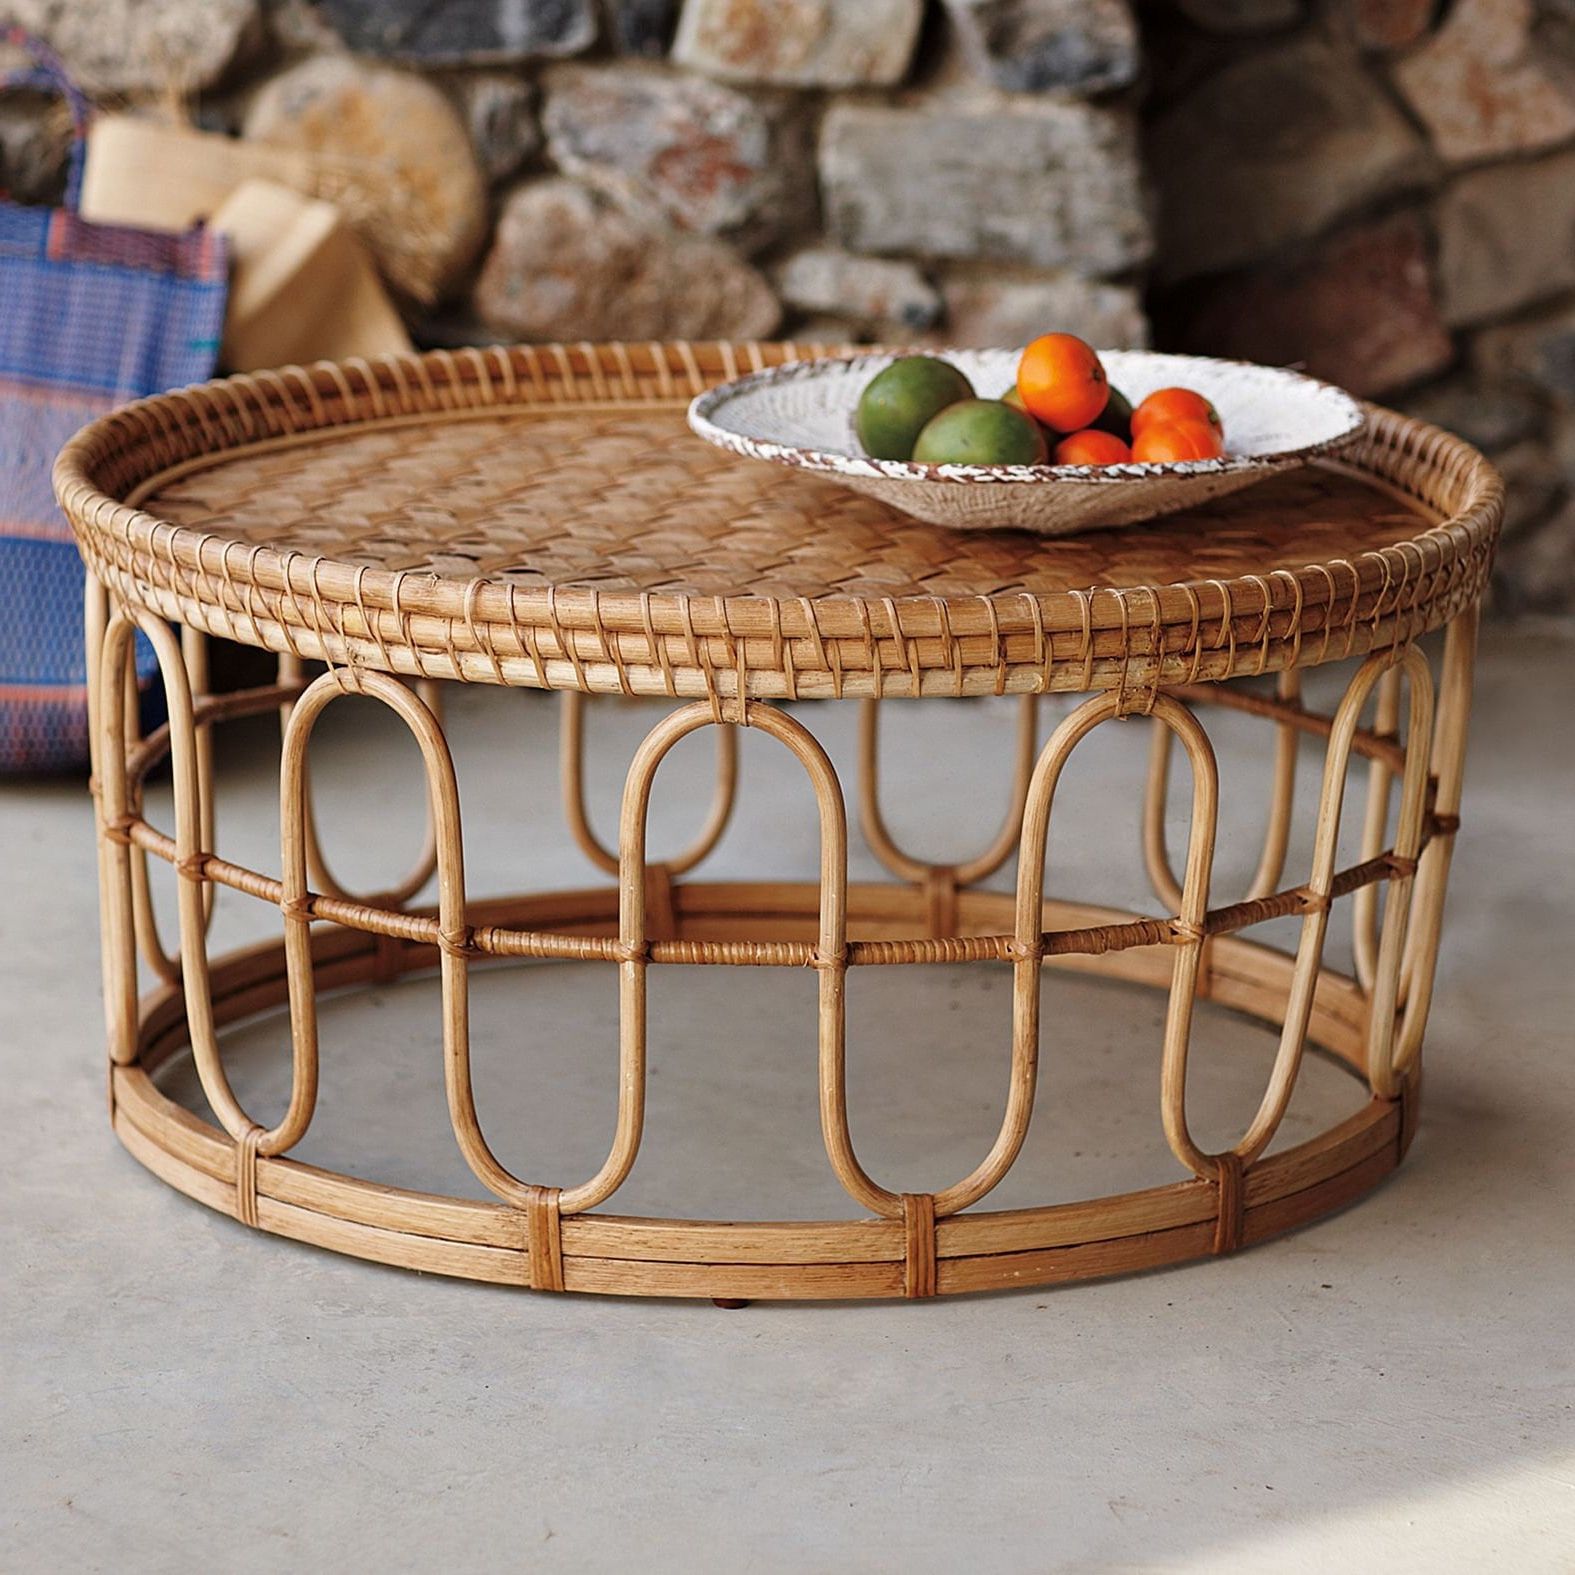 Recent Handmade Rattan Table, Wicker Table, Cane Table, Indoor Furniture, Home  Interior Design Table, Living Home Furniture, Coffee Table (View 5 of 10)